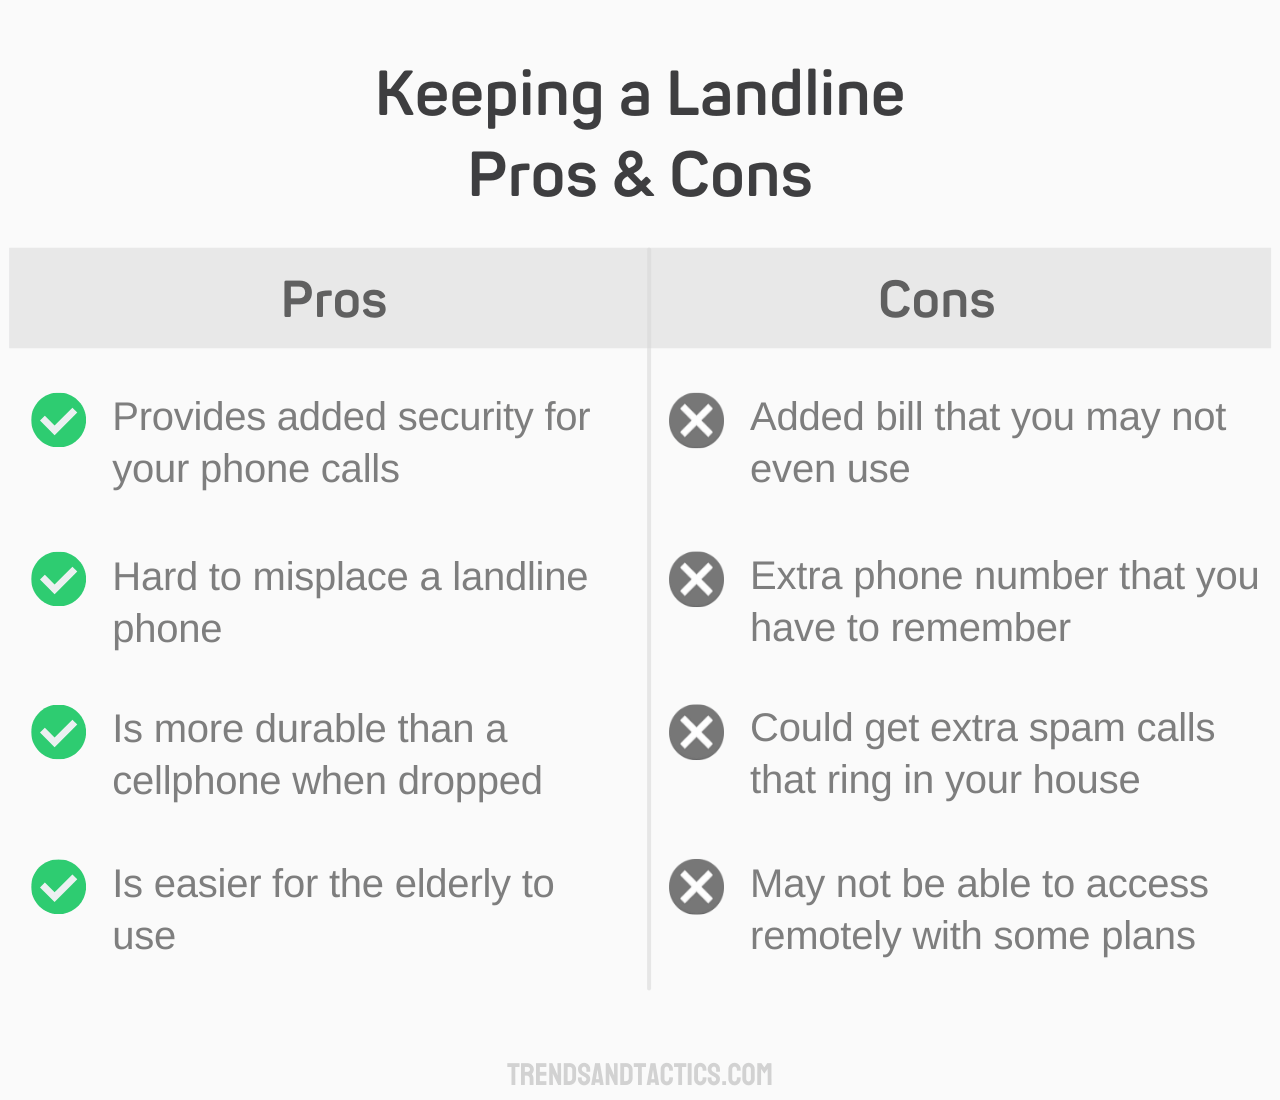 keeping-a-landline-auction-pros-and-cons